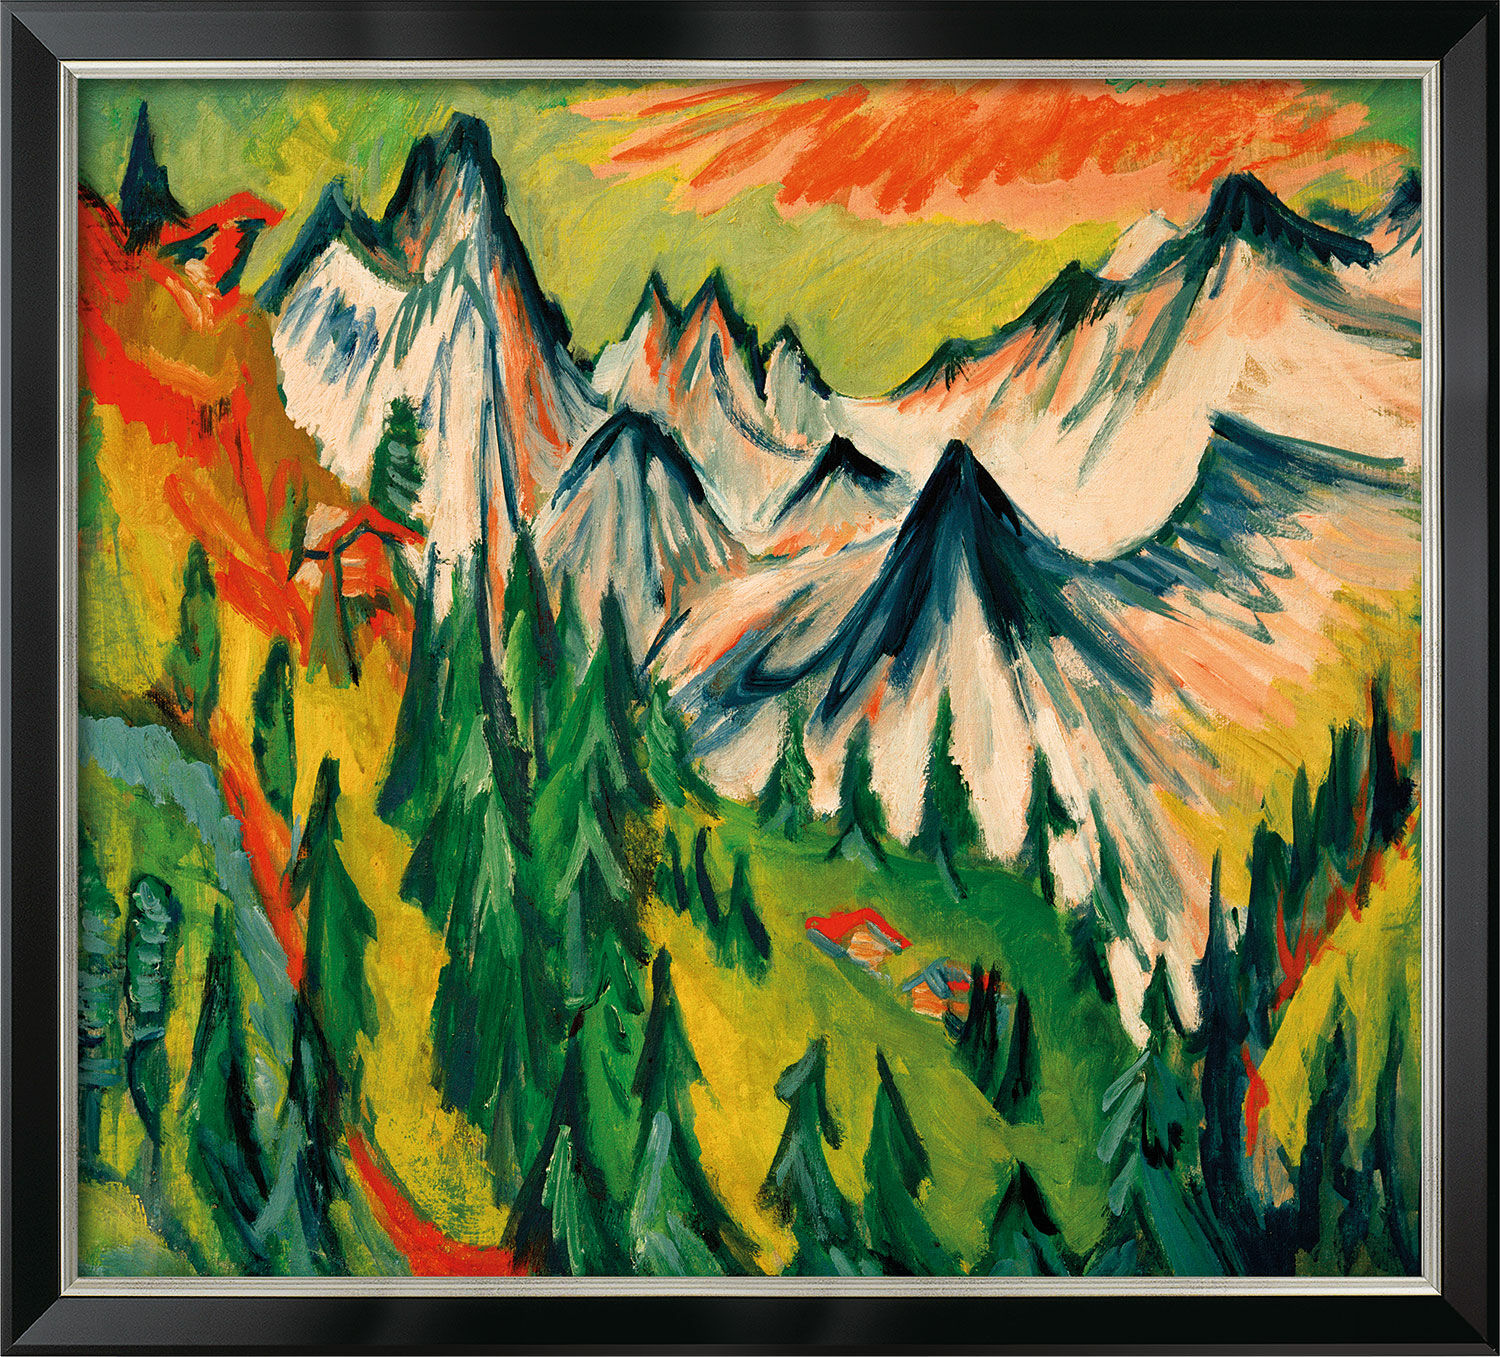 Picture "Mountain Top" (1918), framed by Ernst Ludwig Kirchner